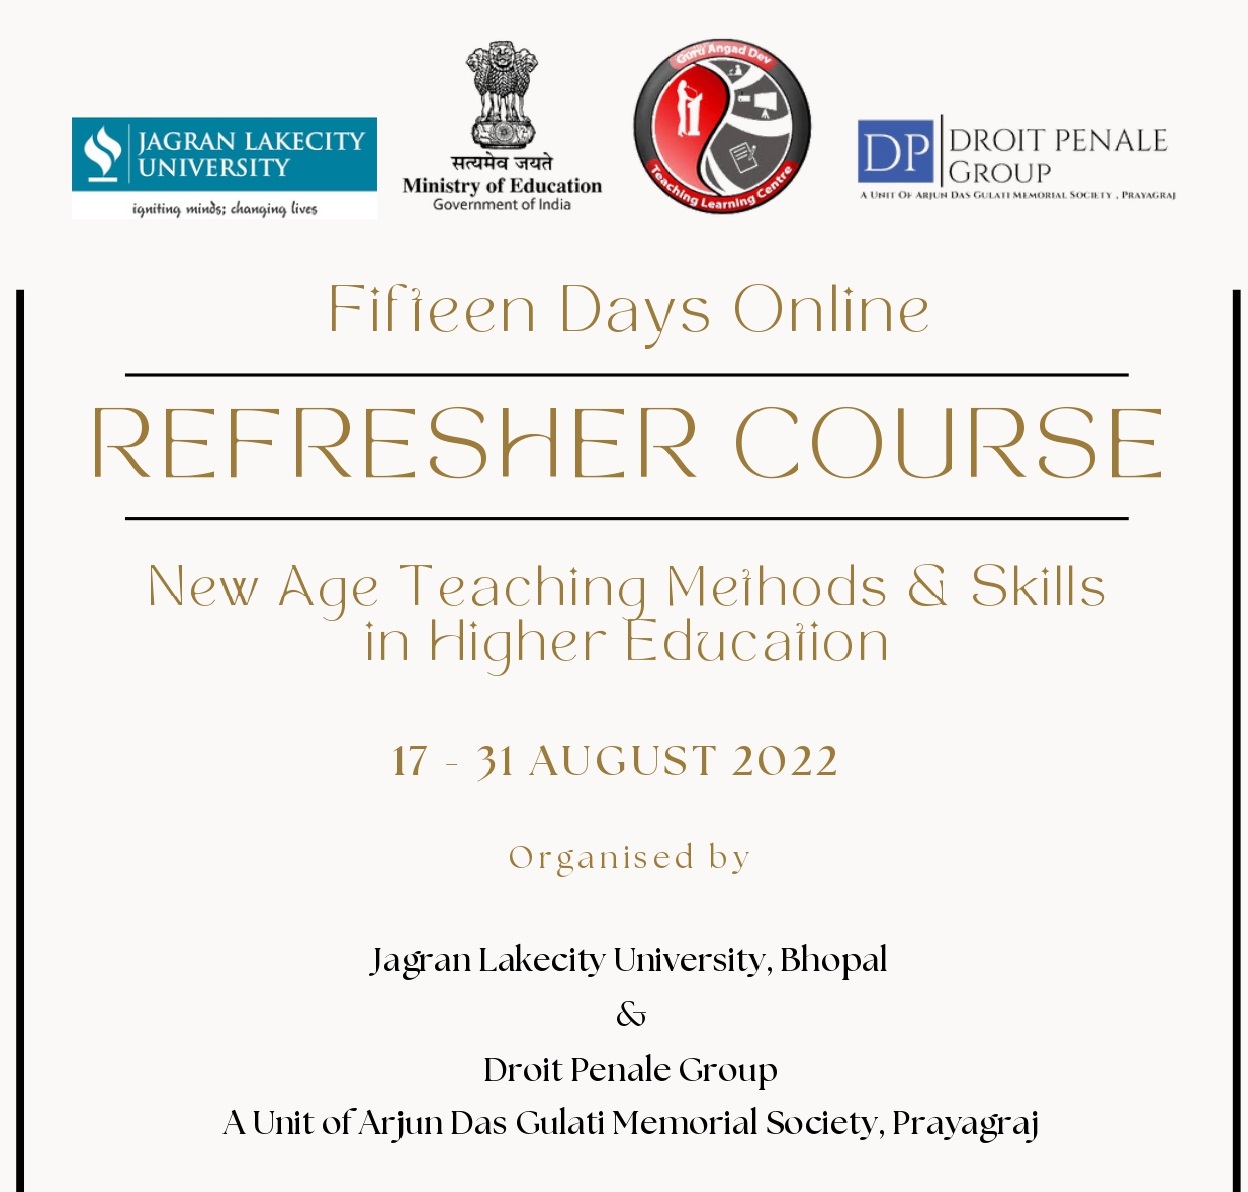 Course Image OFDP-91: Fifteen Days Online Refresher Course on New Age Teaching Methods & Skills in Higher Education